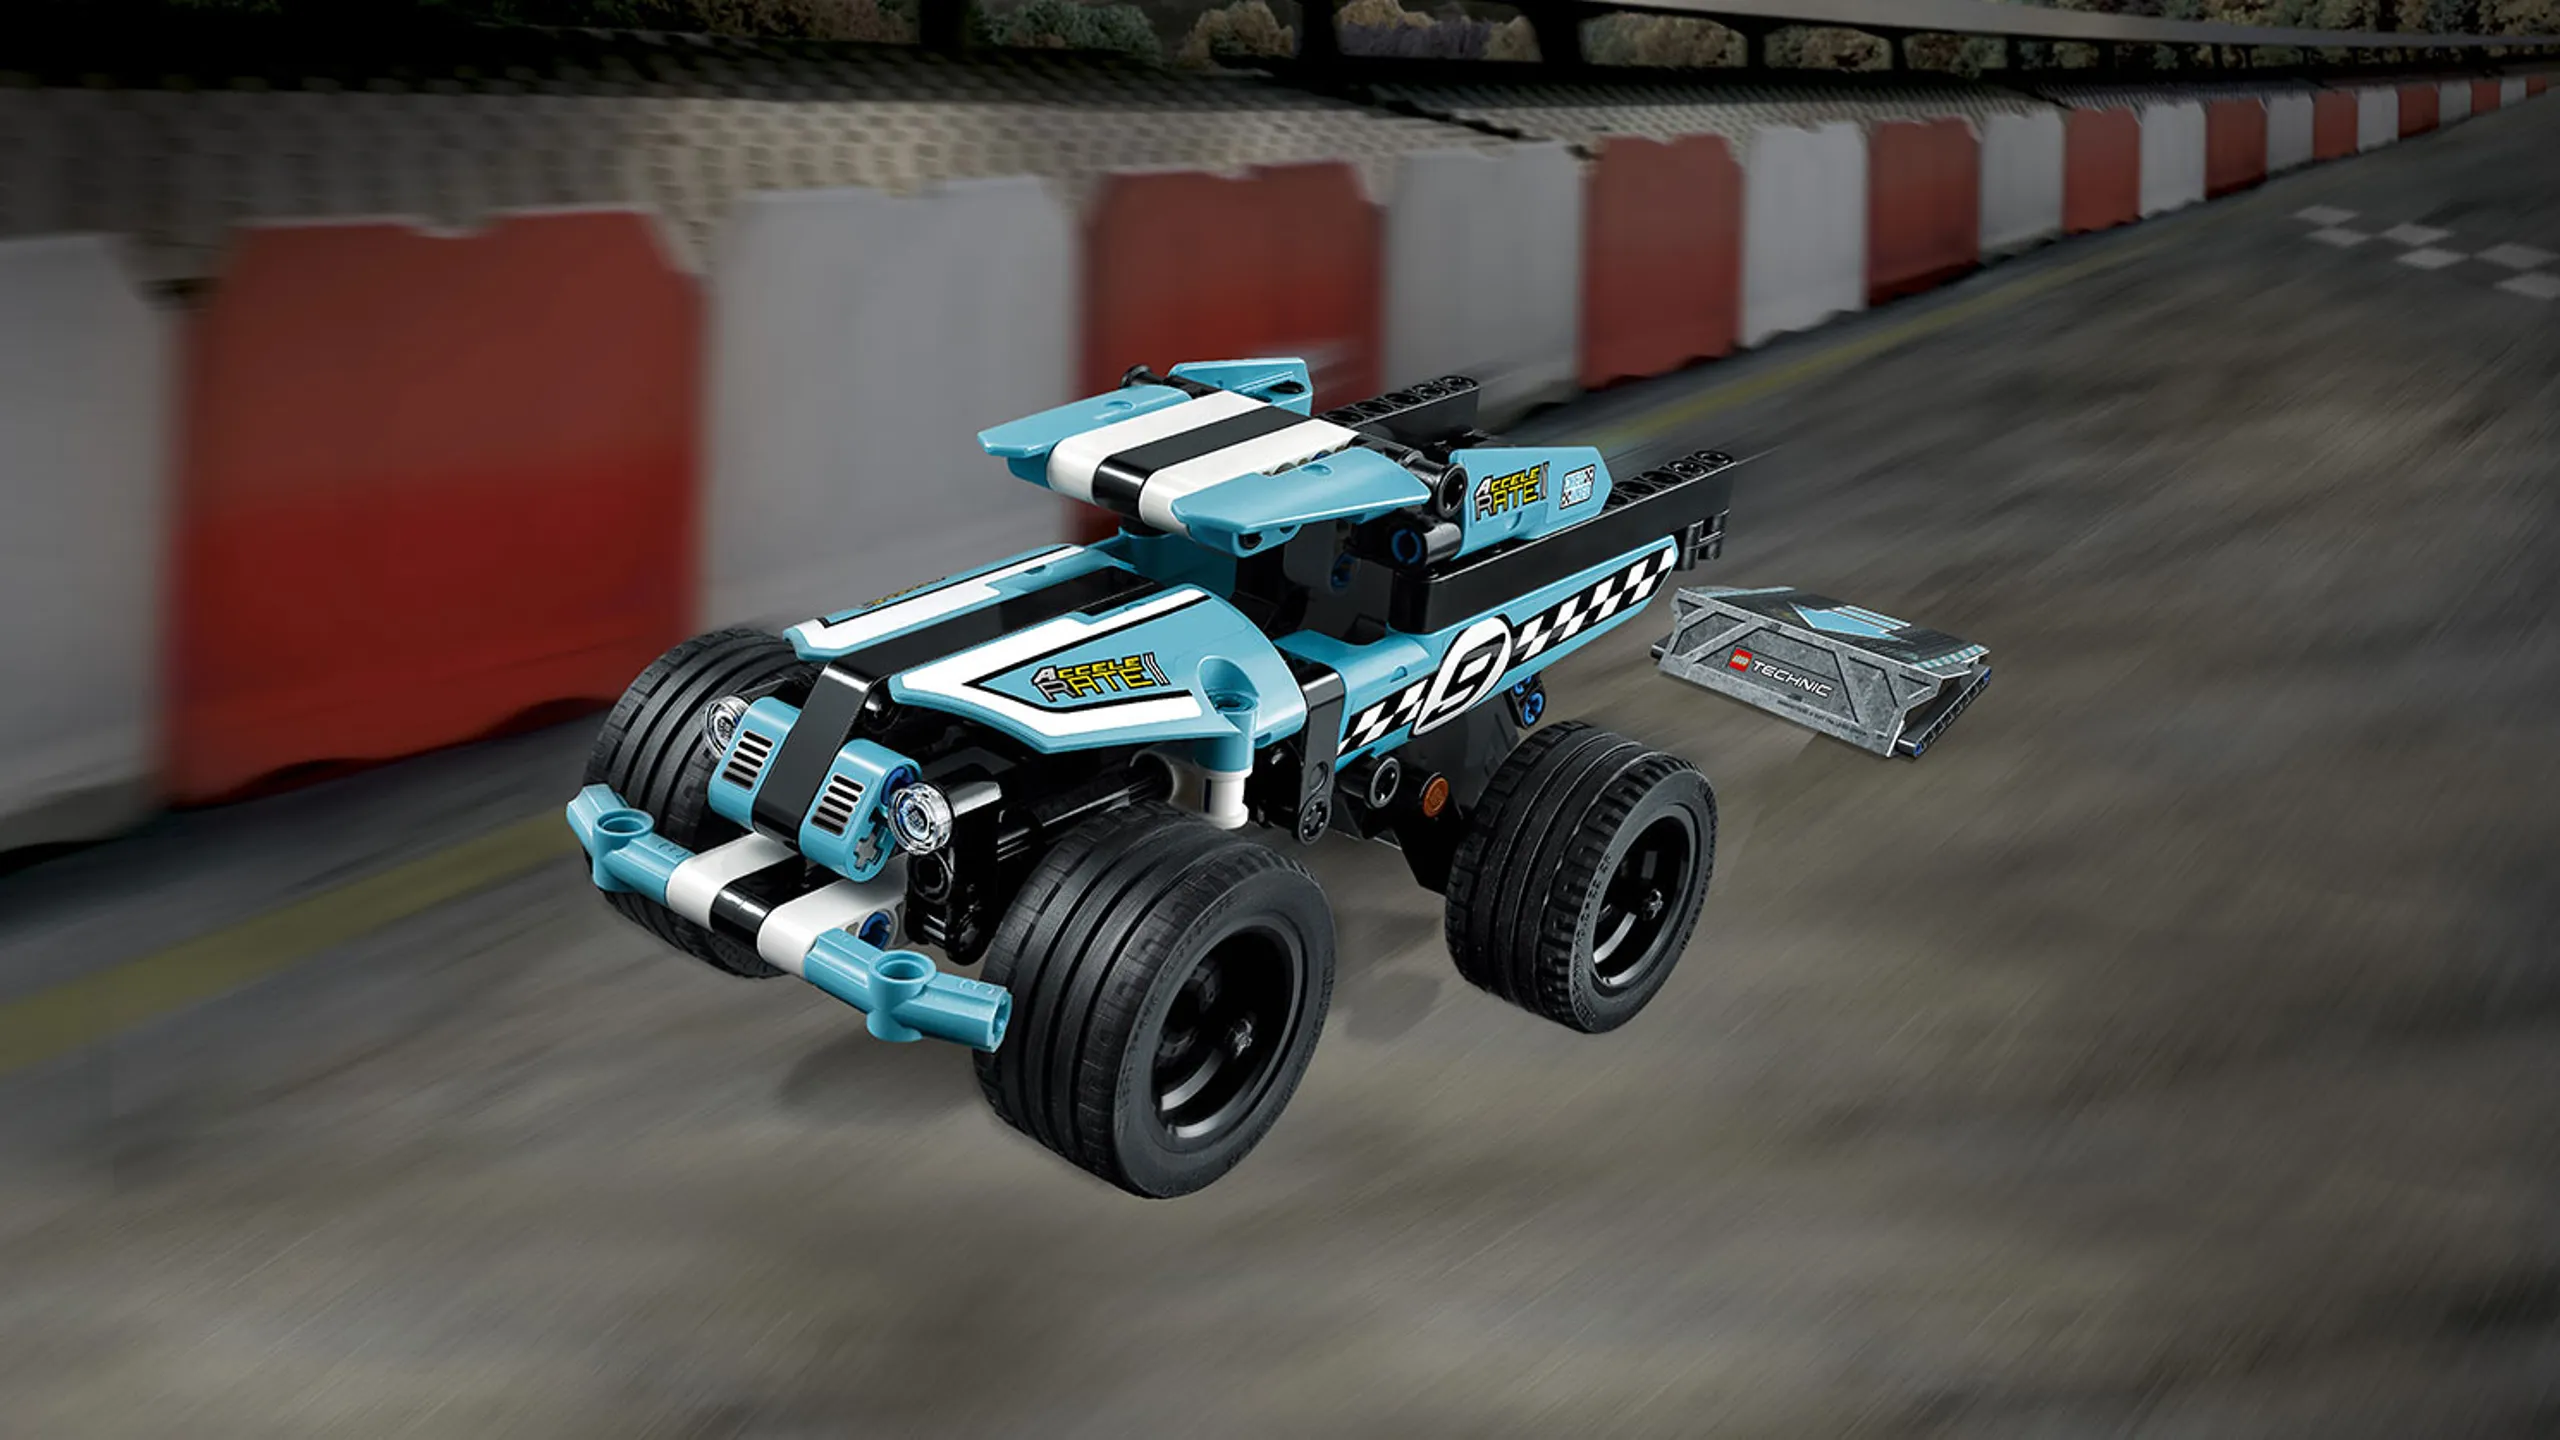 LEGO Technic - 42059 Stunt Truck - Activate the pull-back motor of the rugged Stunt Truck with checkered racing stickers, sturdy front bumper and wide blue rims with low profile tires for ultimate grip.